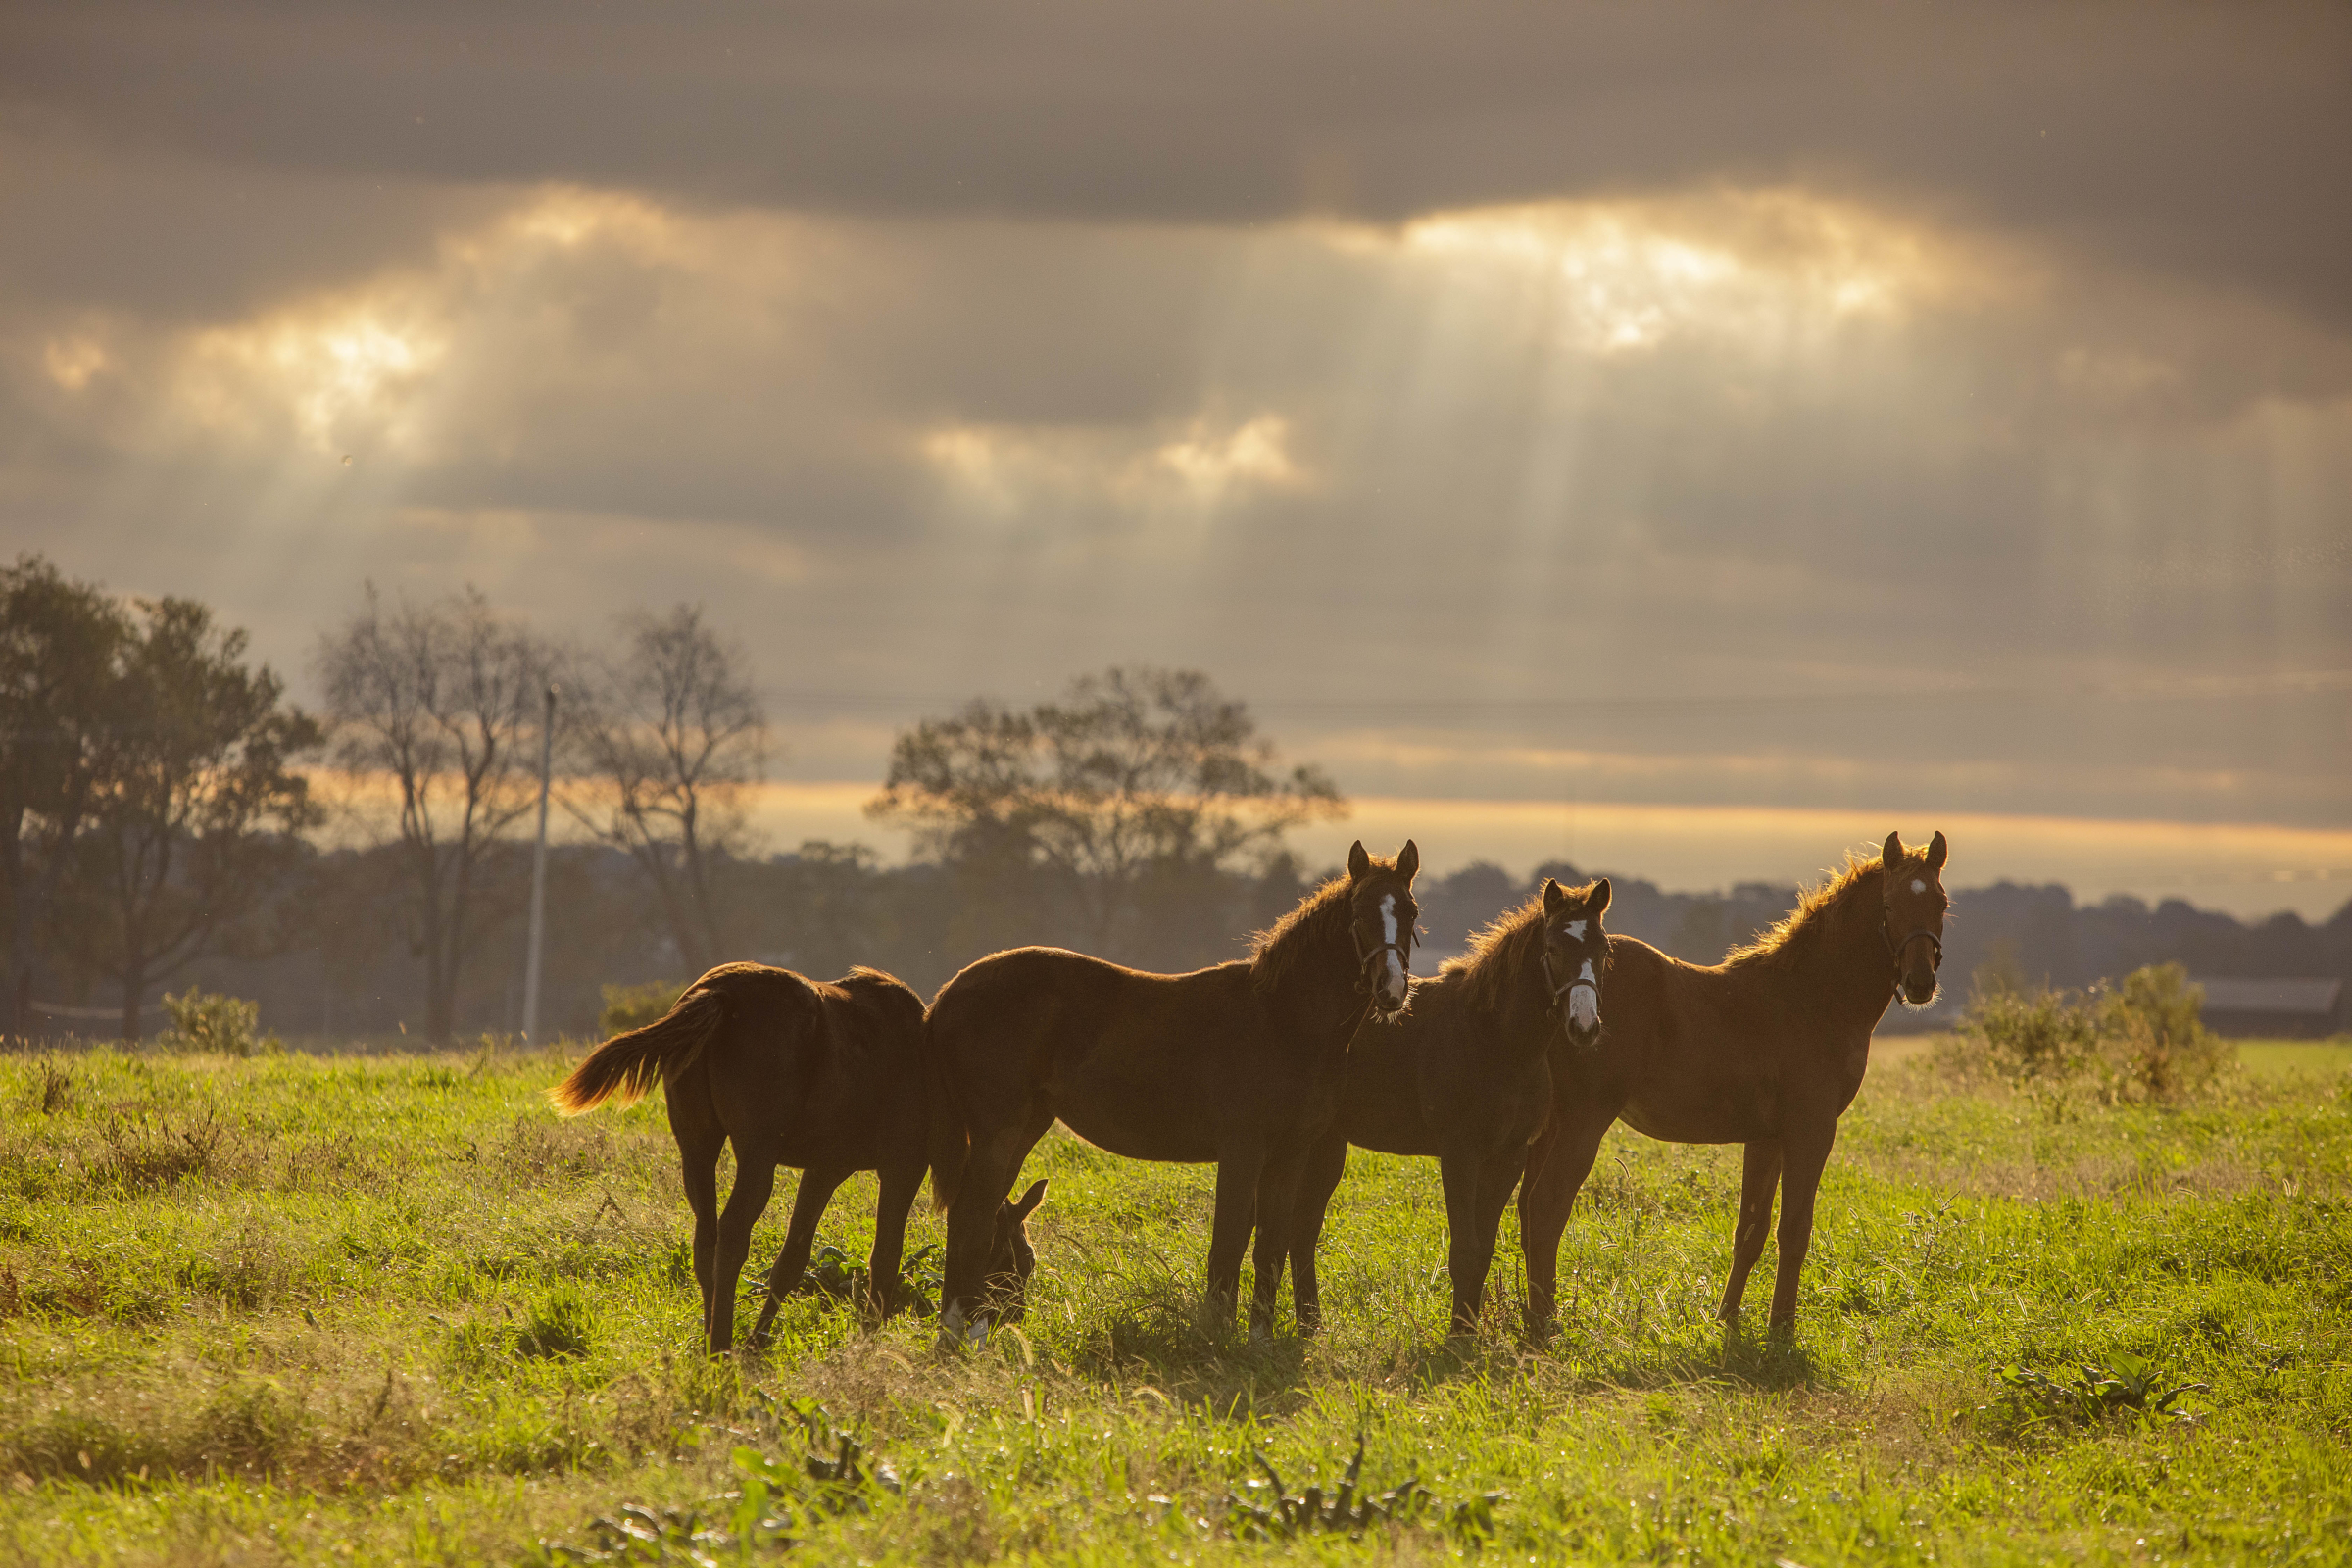 A group of horses in an open field.